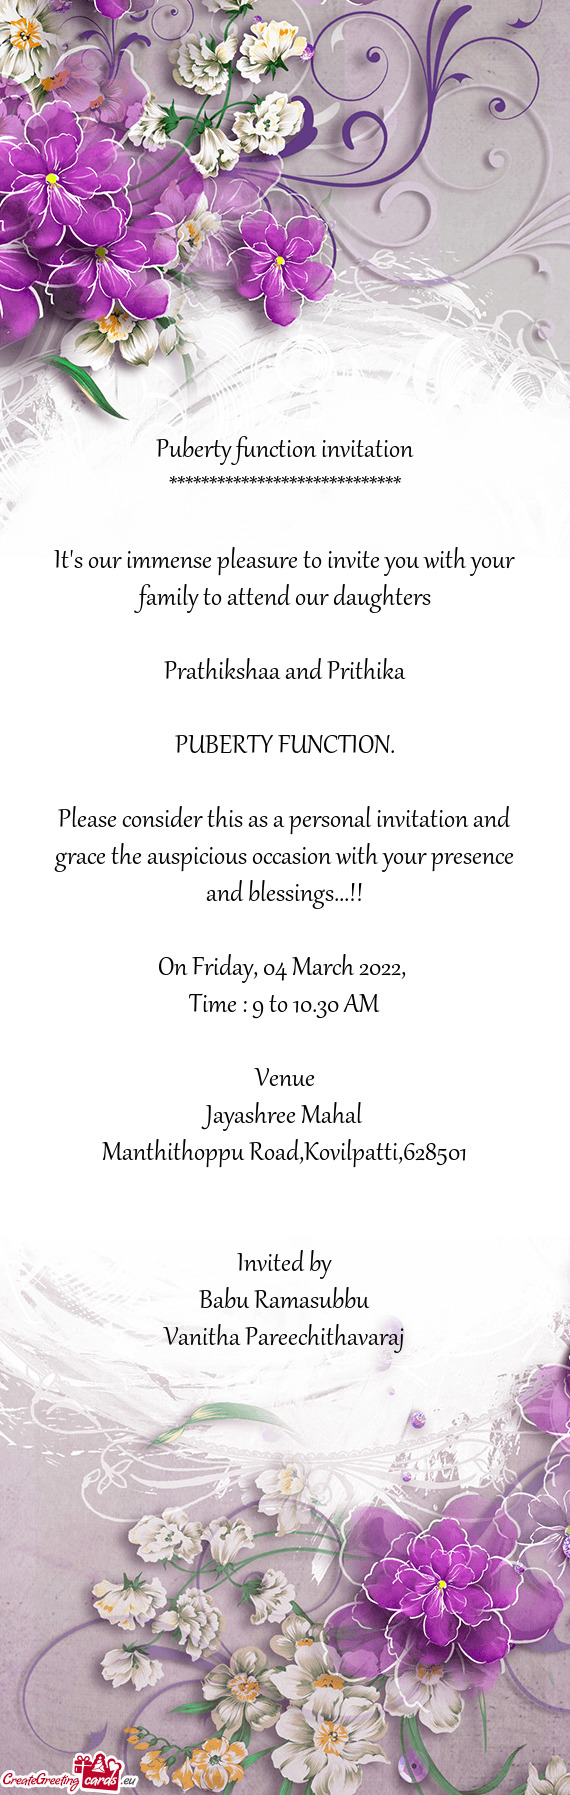 Please consider this as a personal invitation and grace the auspicious occasion with your presence a